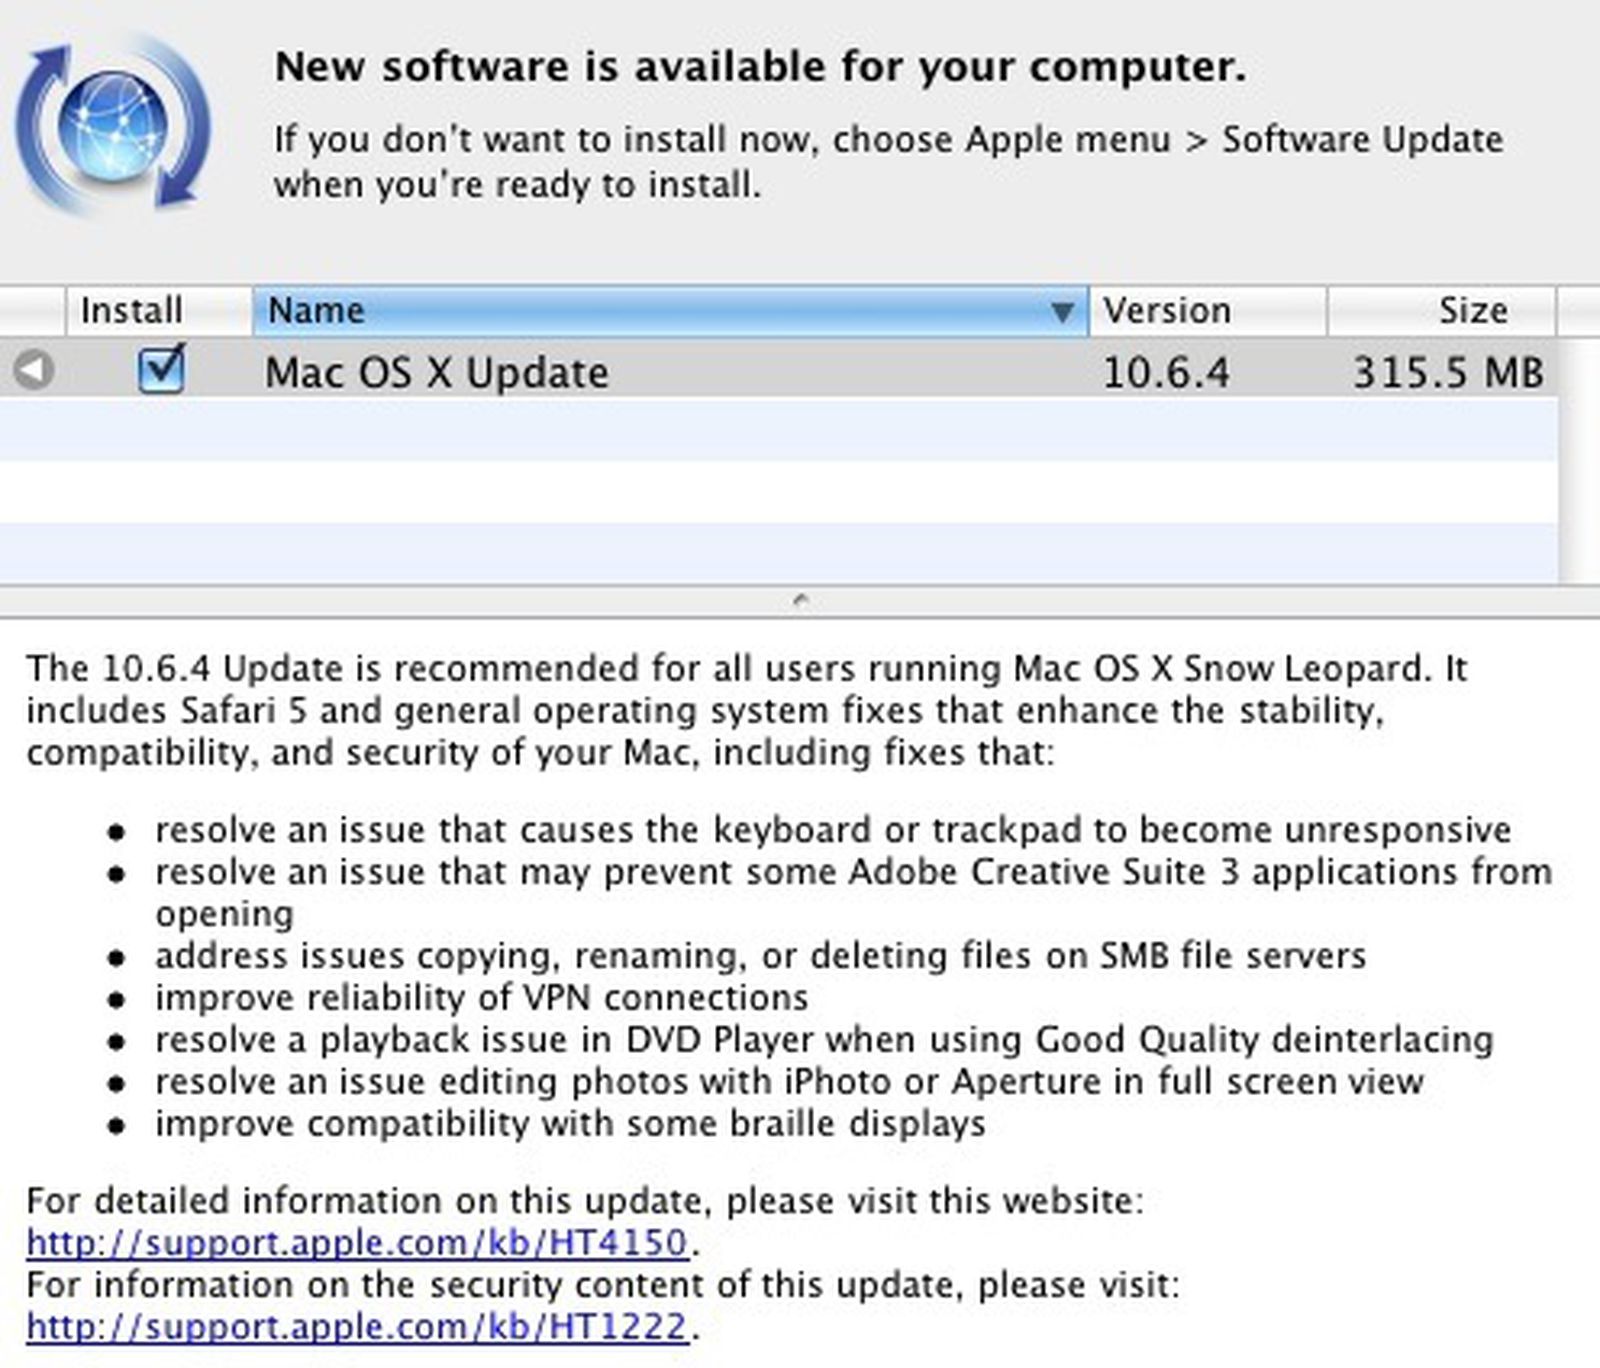 UpdatePack7R2 23.7.12 instal the new version for apple